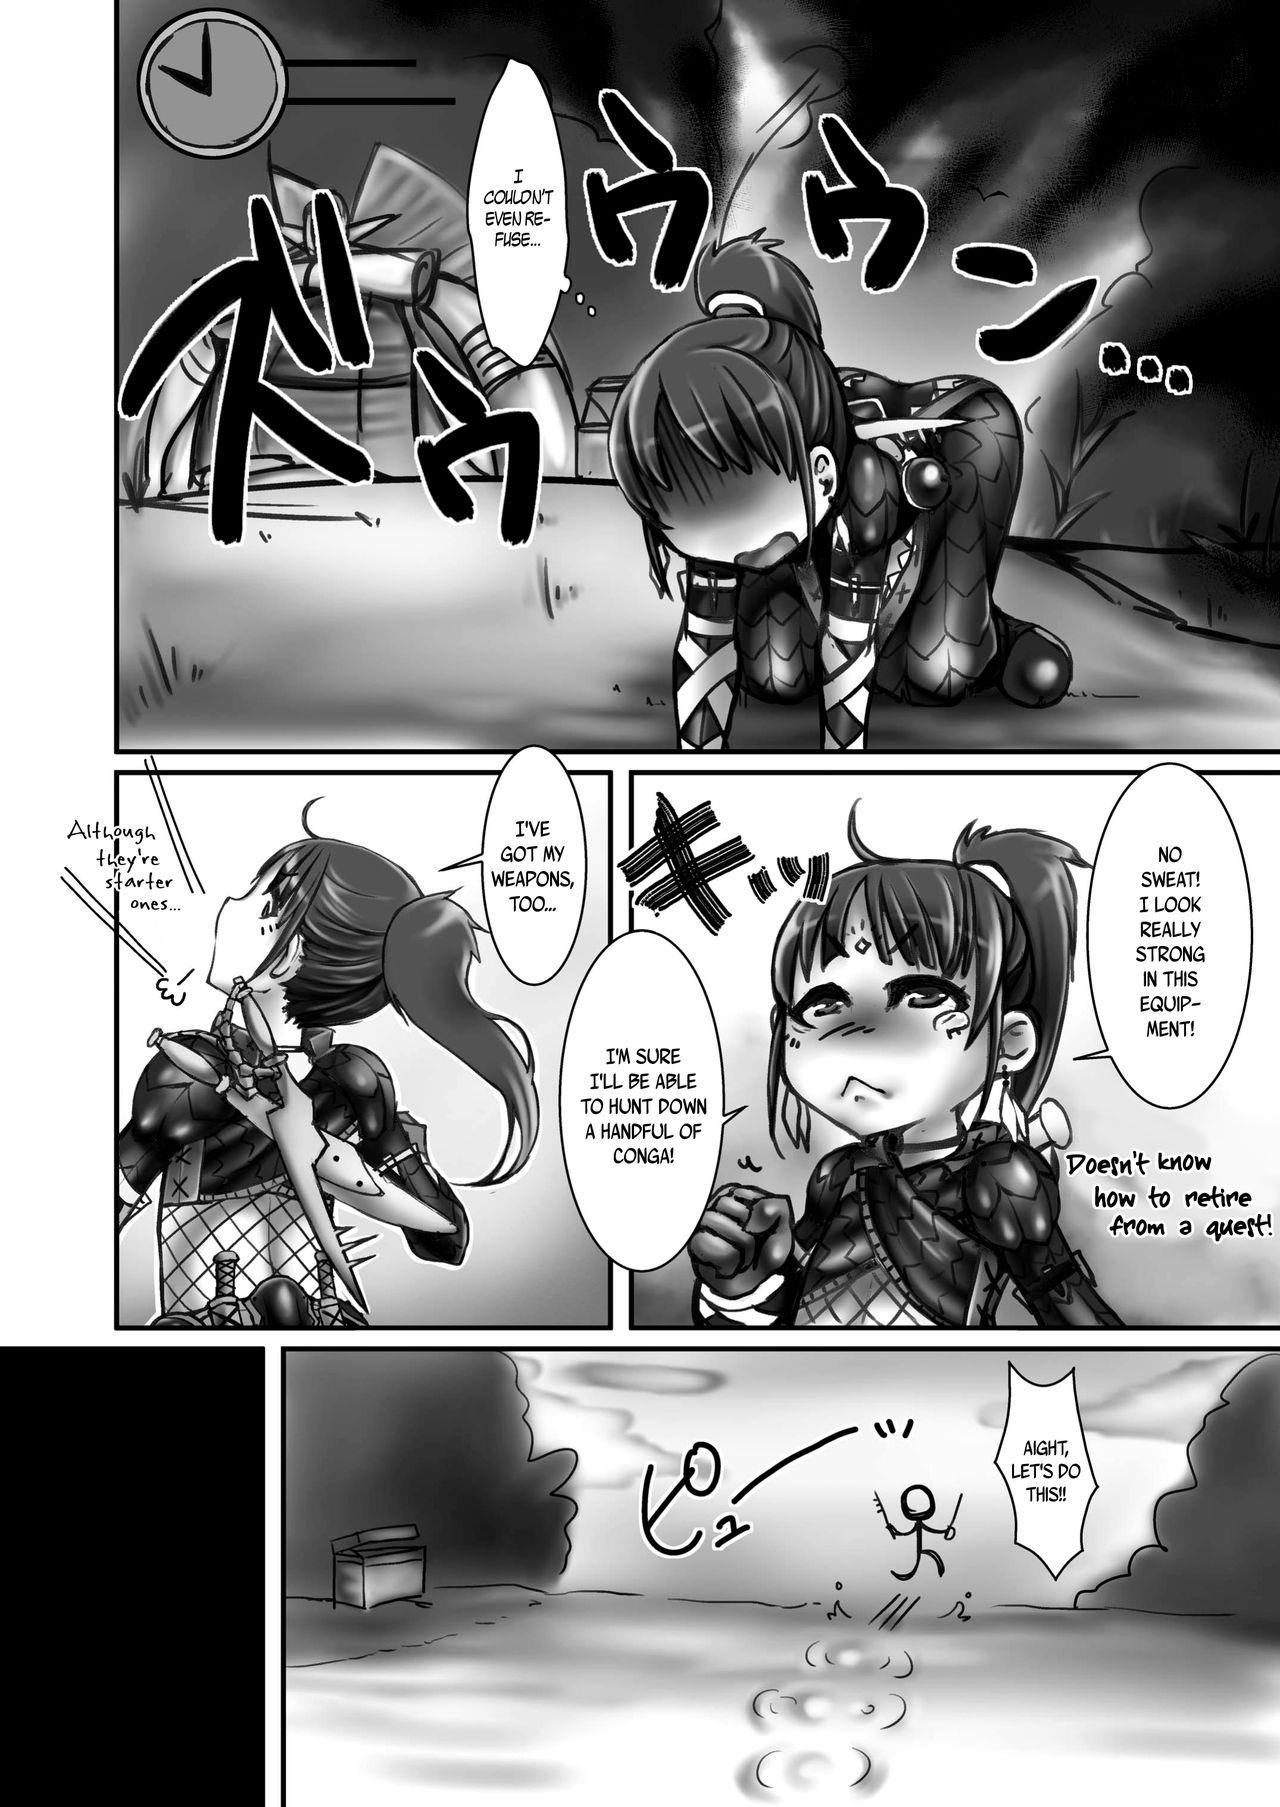 Pussy Fucking Kinkue! Hatsujou Kemonotachi wo Kare! | URGENT QUEST! Hunt Down the Beasts in Heat! - Monster hunter Mamadas - Page 6